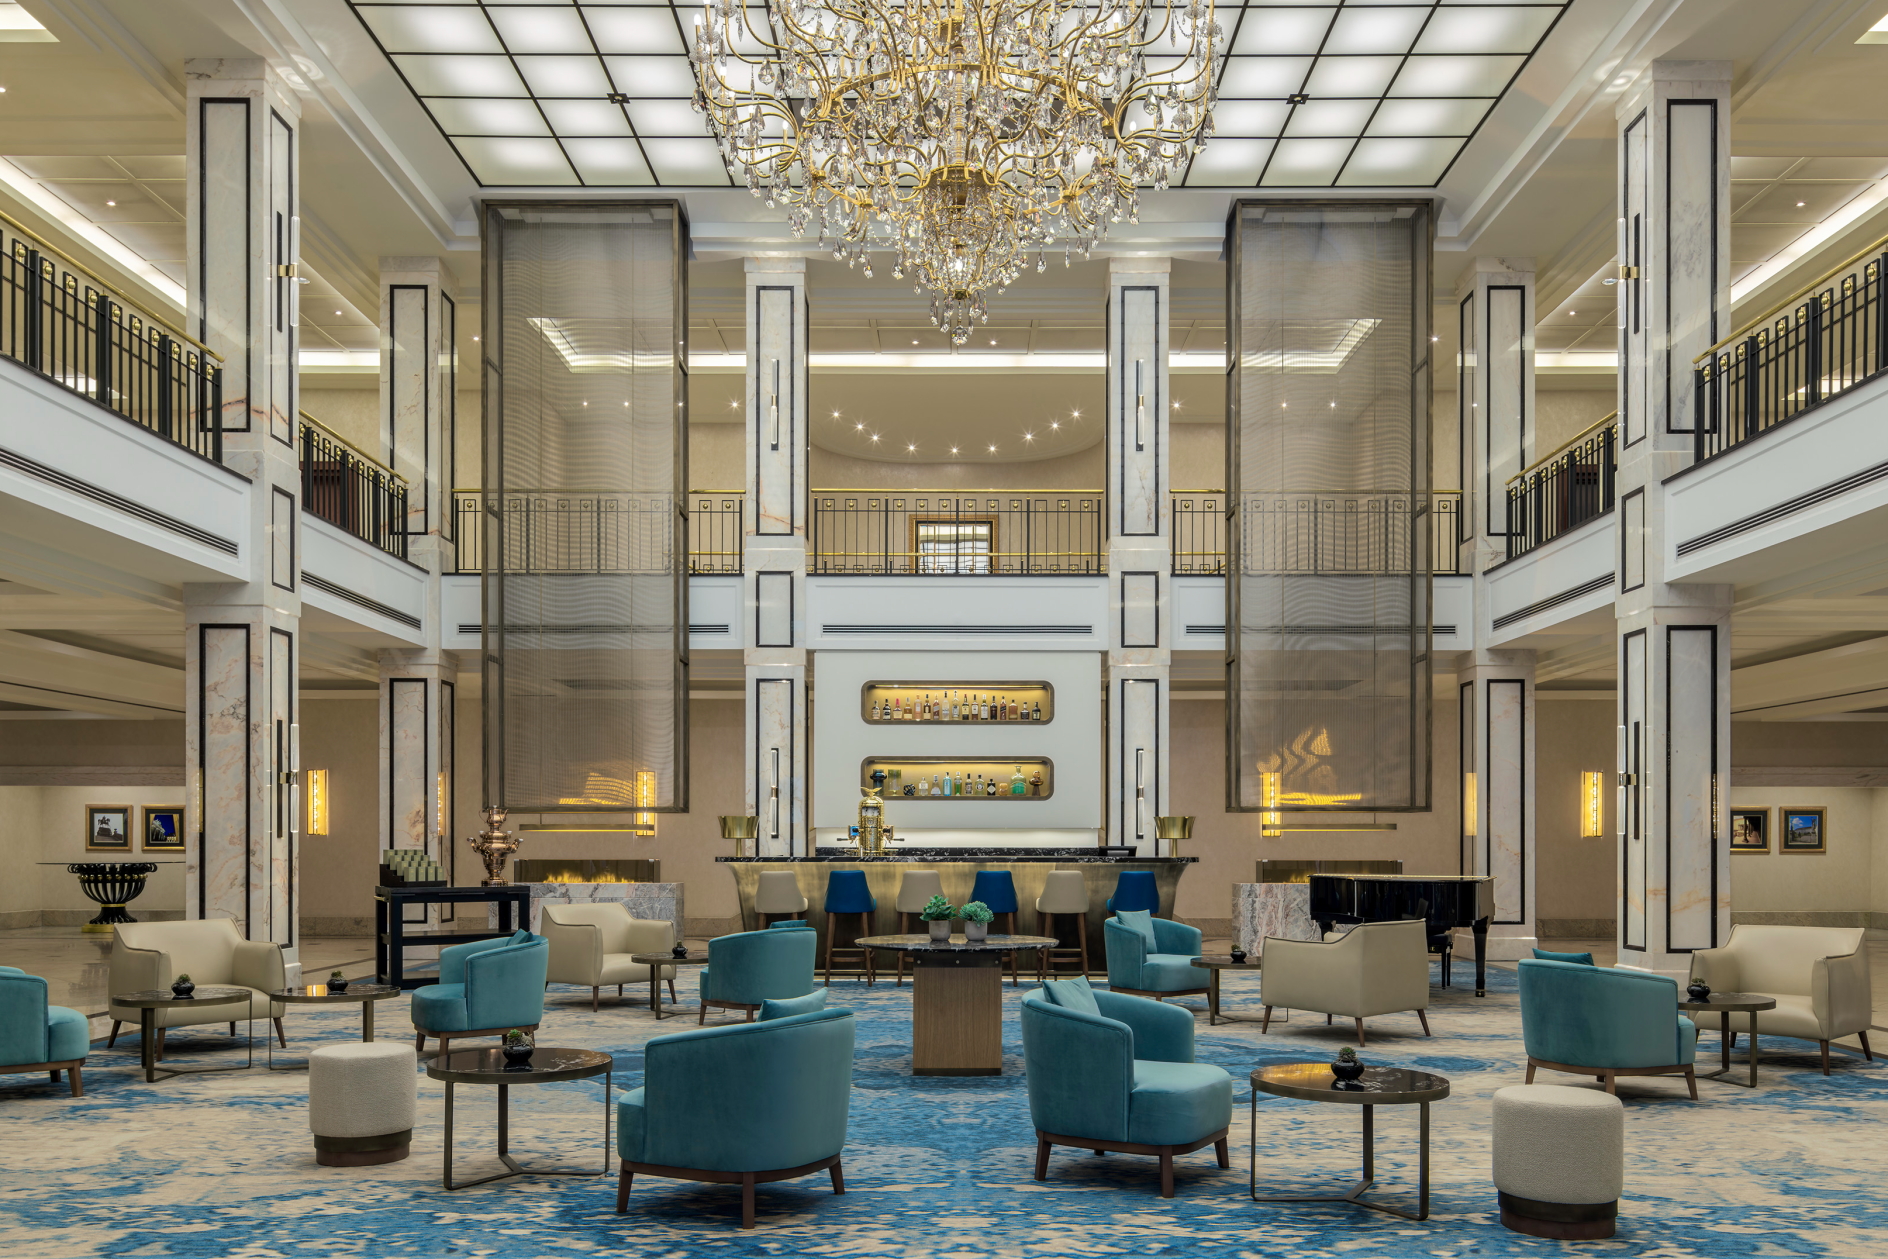 Lobby of the JW Marriott Hotel Berlin. Click to enlarge.